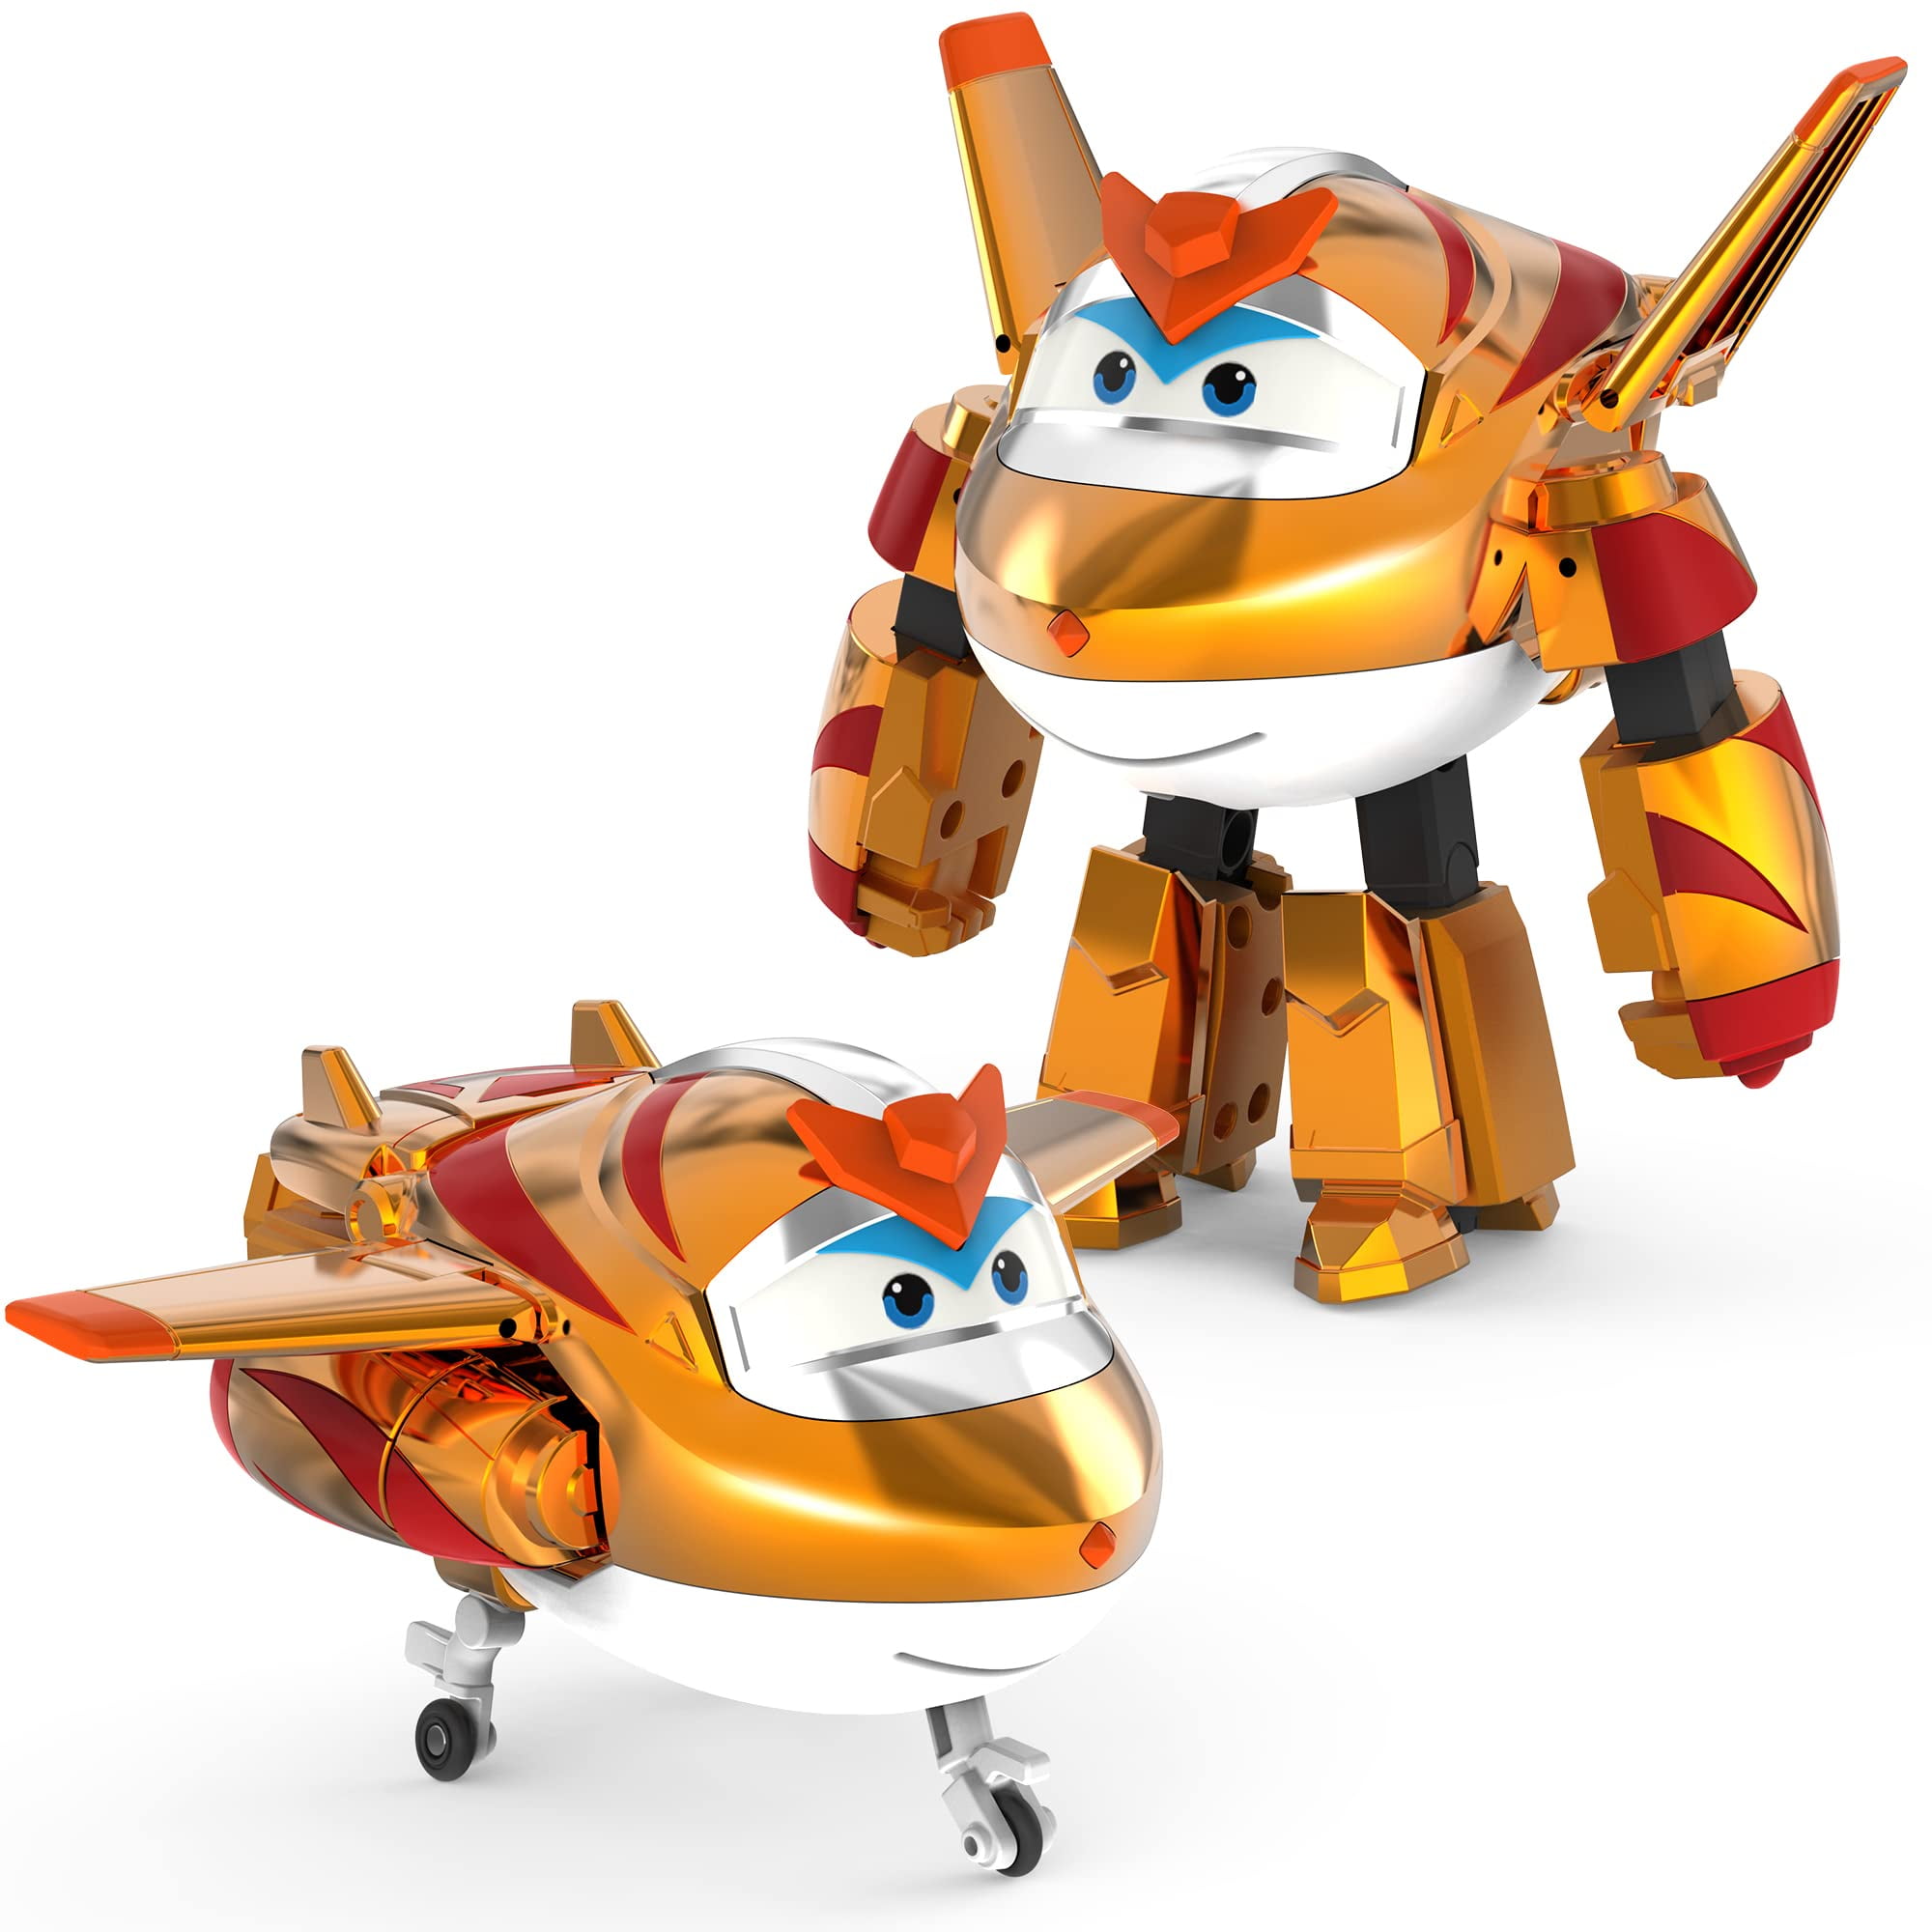 Super Wings 5 Transforming Golden Boy Airplane Toys, Vehicle Action  Figure, Superwings Transforming Plane to Robot, Flying Toy Vehicle Playset,  Gifts